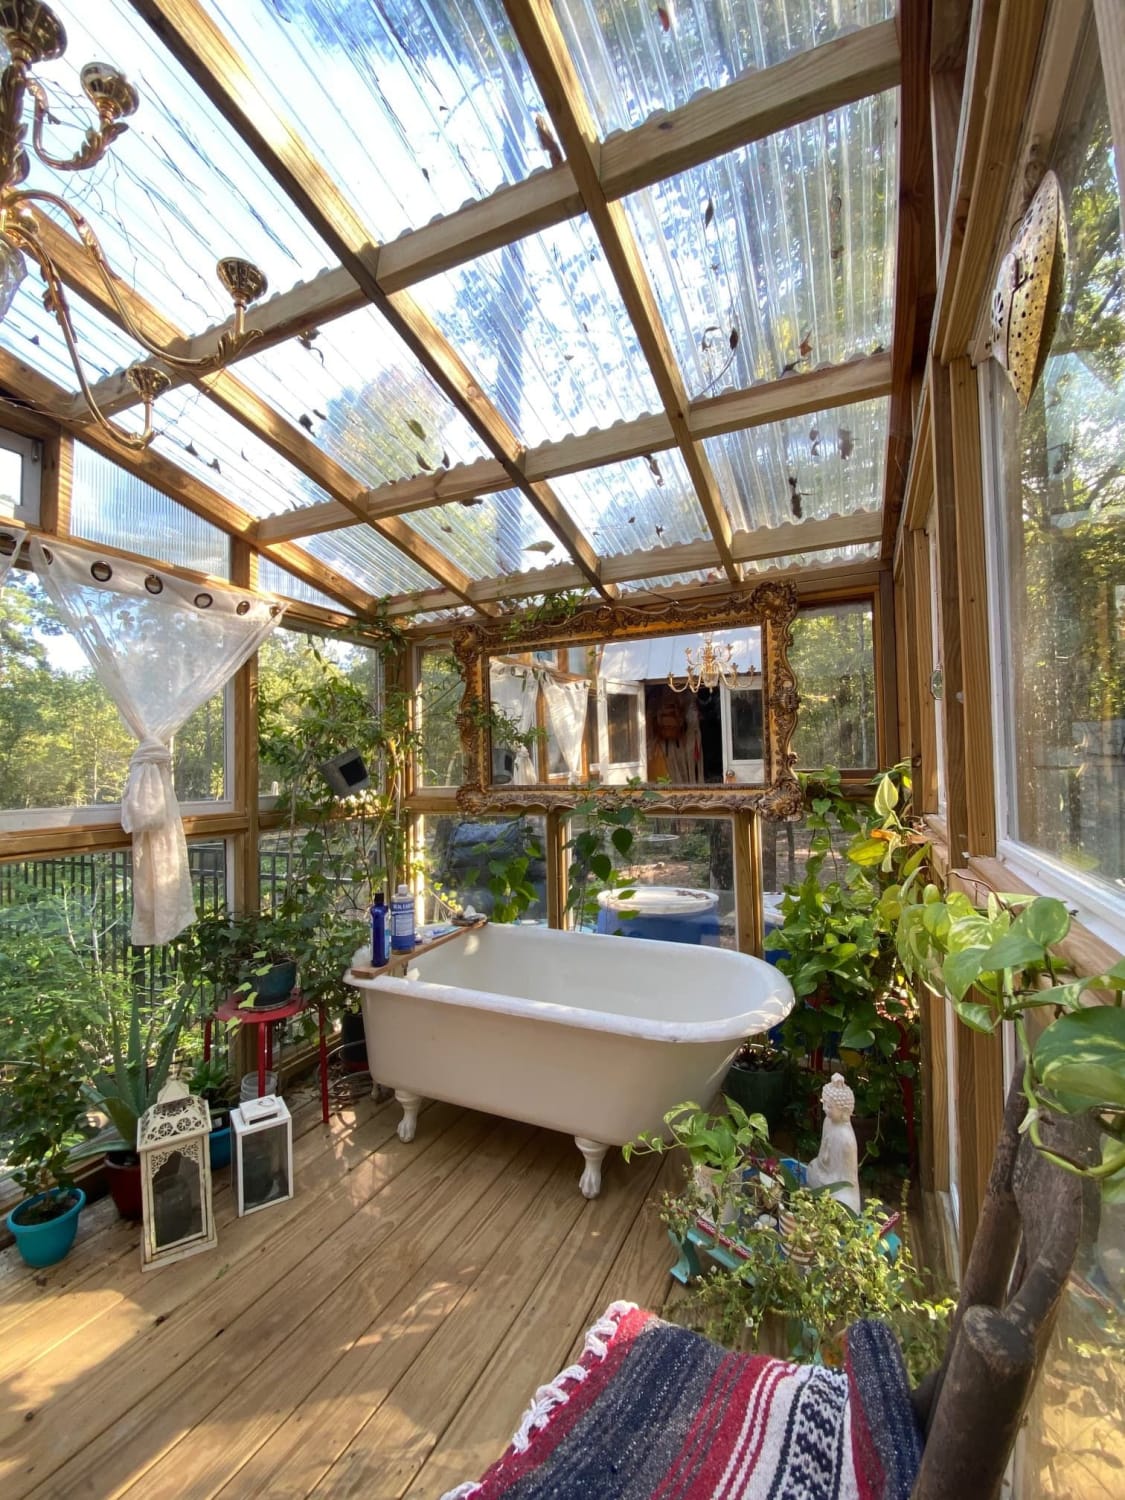 A 304-Square-Foot DIY Tiny House with a Greenhouse Bathroom Is Just One of the Reasons This Off-Grid Homestead Is a Dreamy Paradise